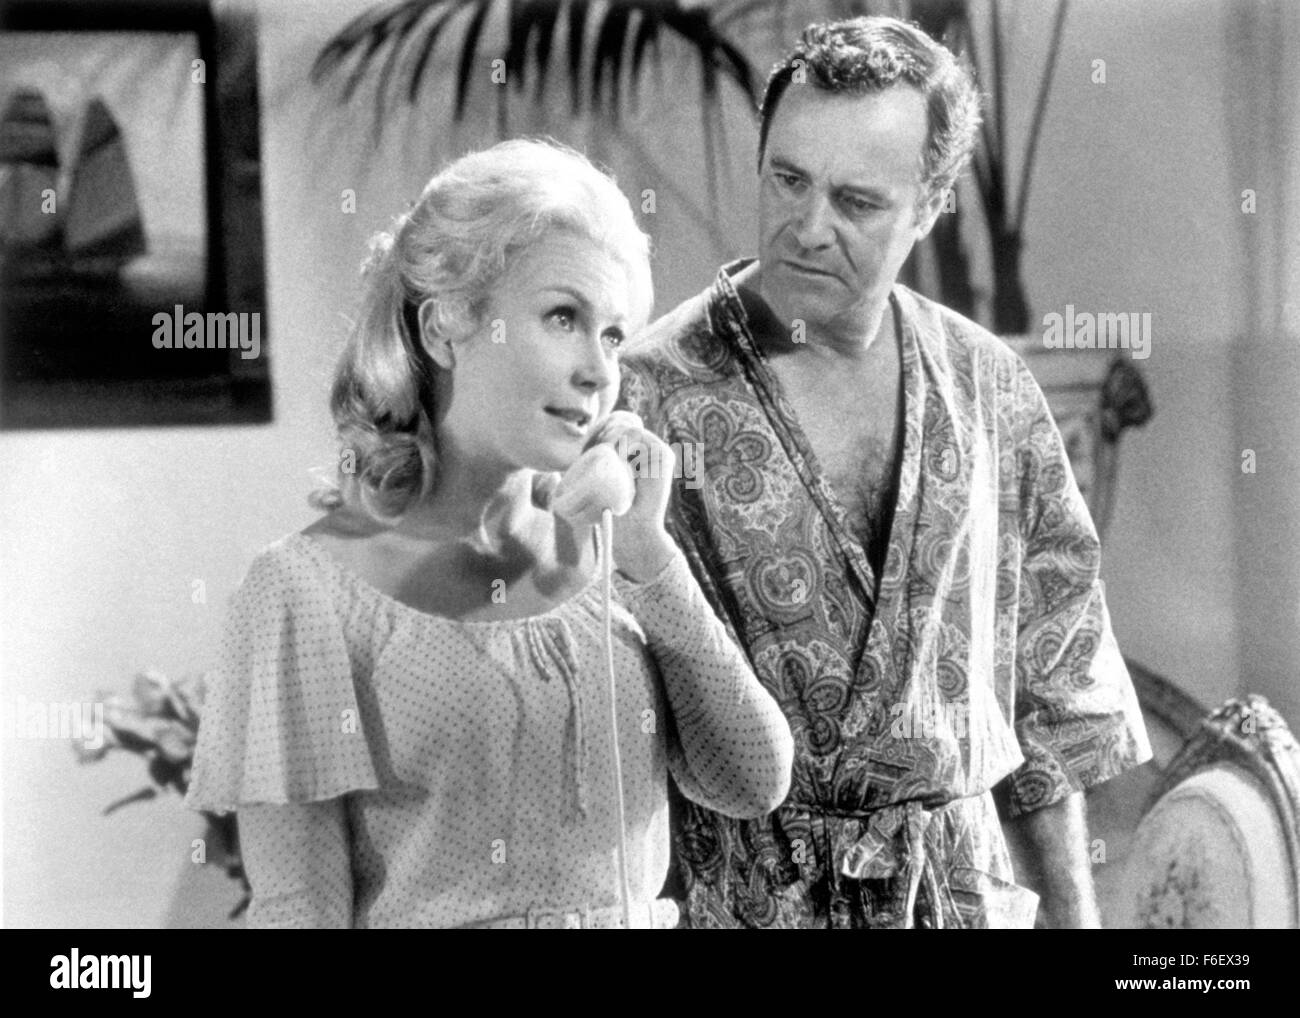 Dec 17, 1972; Hollywood, CA, USA; JULIET MILLS as Pamela Piggott and JACK LEMMON as Wendell Armbruster, Jr. in the romantic comedy drama film ''Avanti'' directed by Billy Wilder. Stock Photo